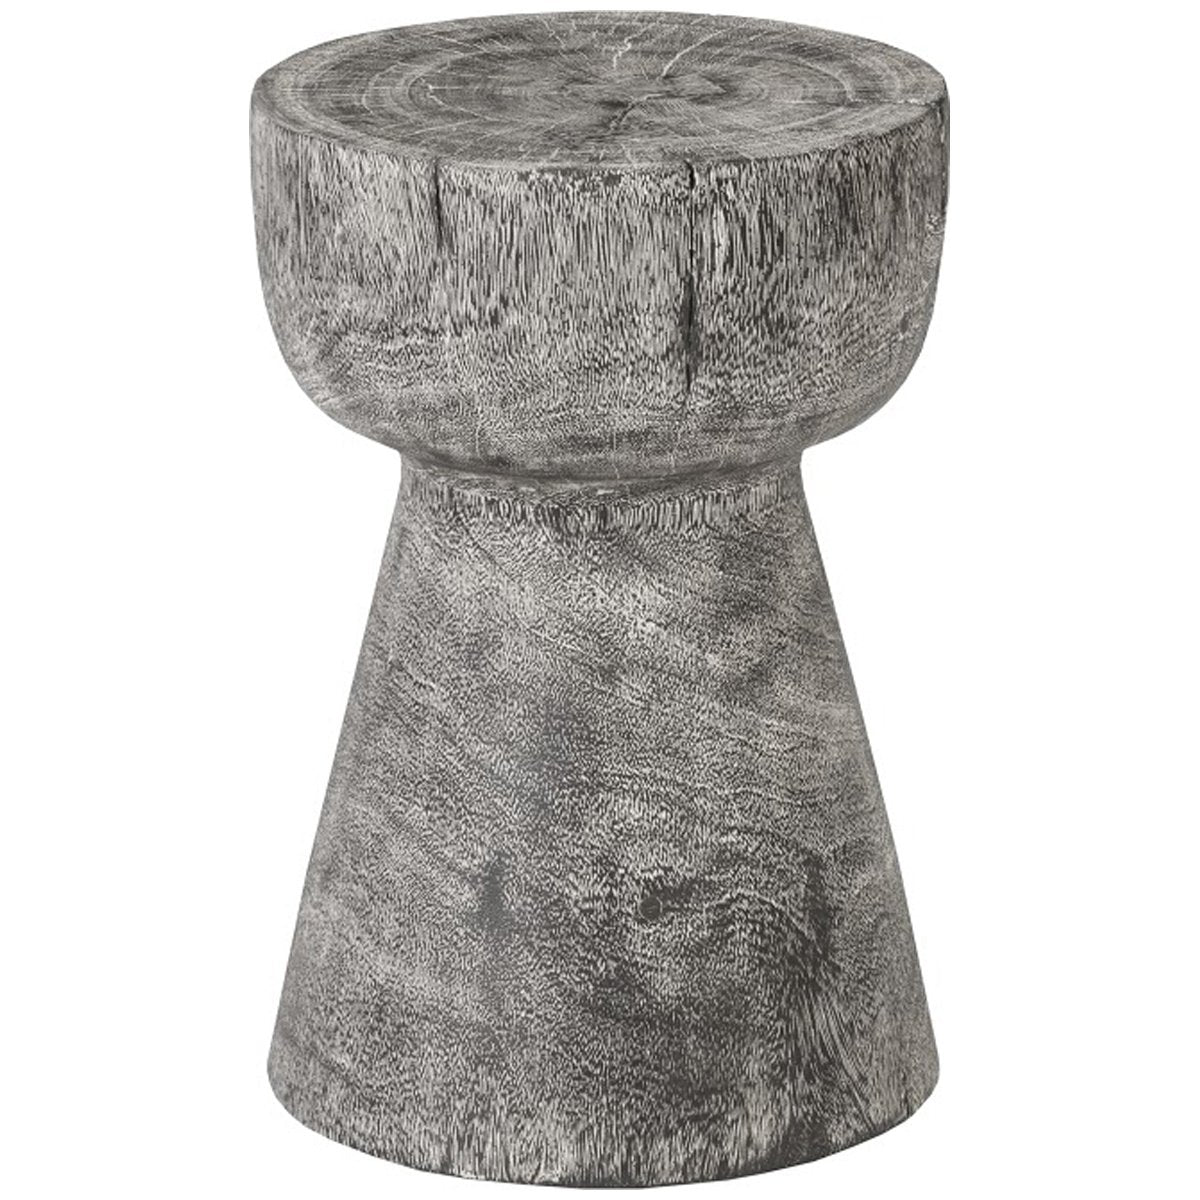 Phillips Collection Curved Wood Stool, Thin